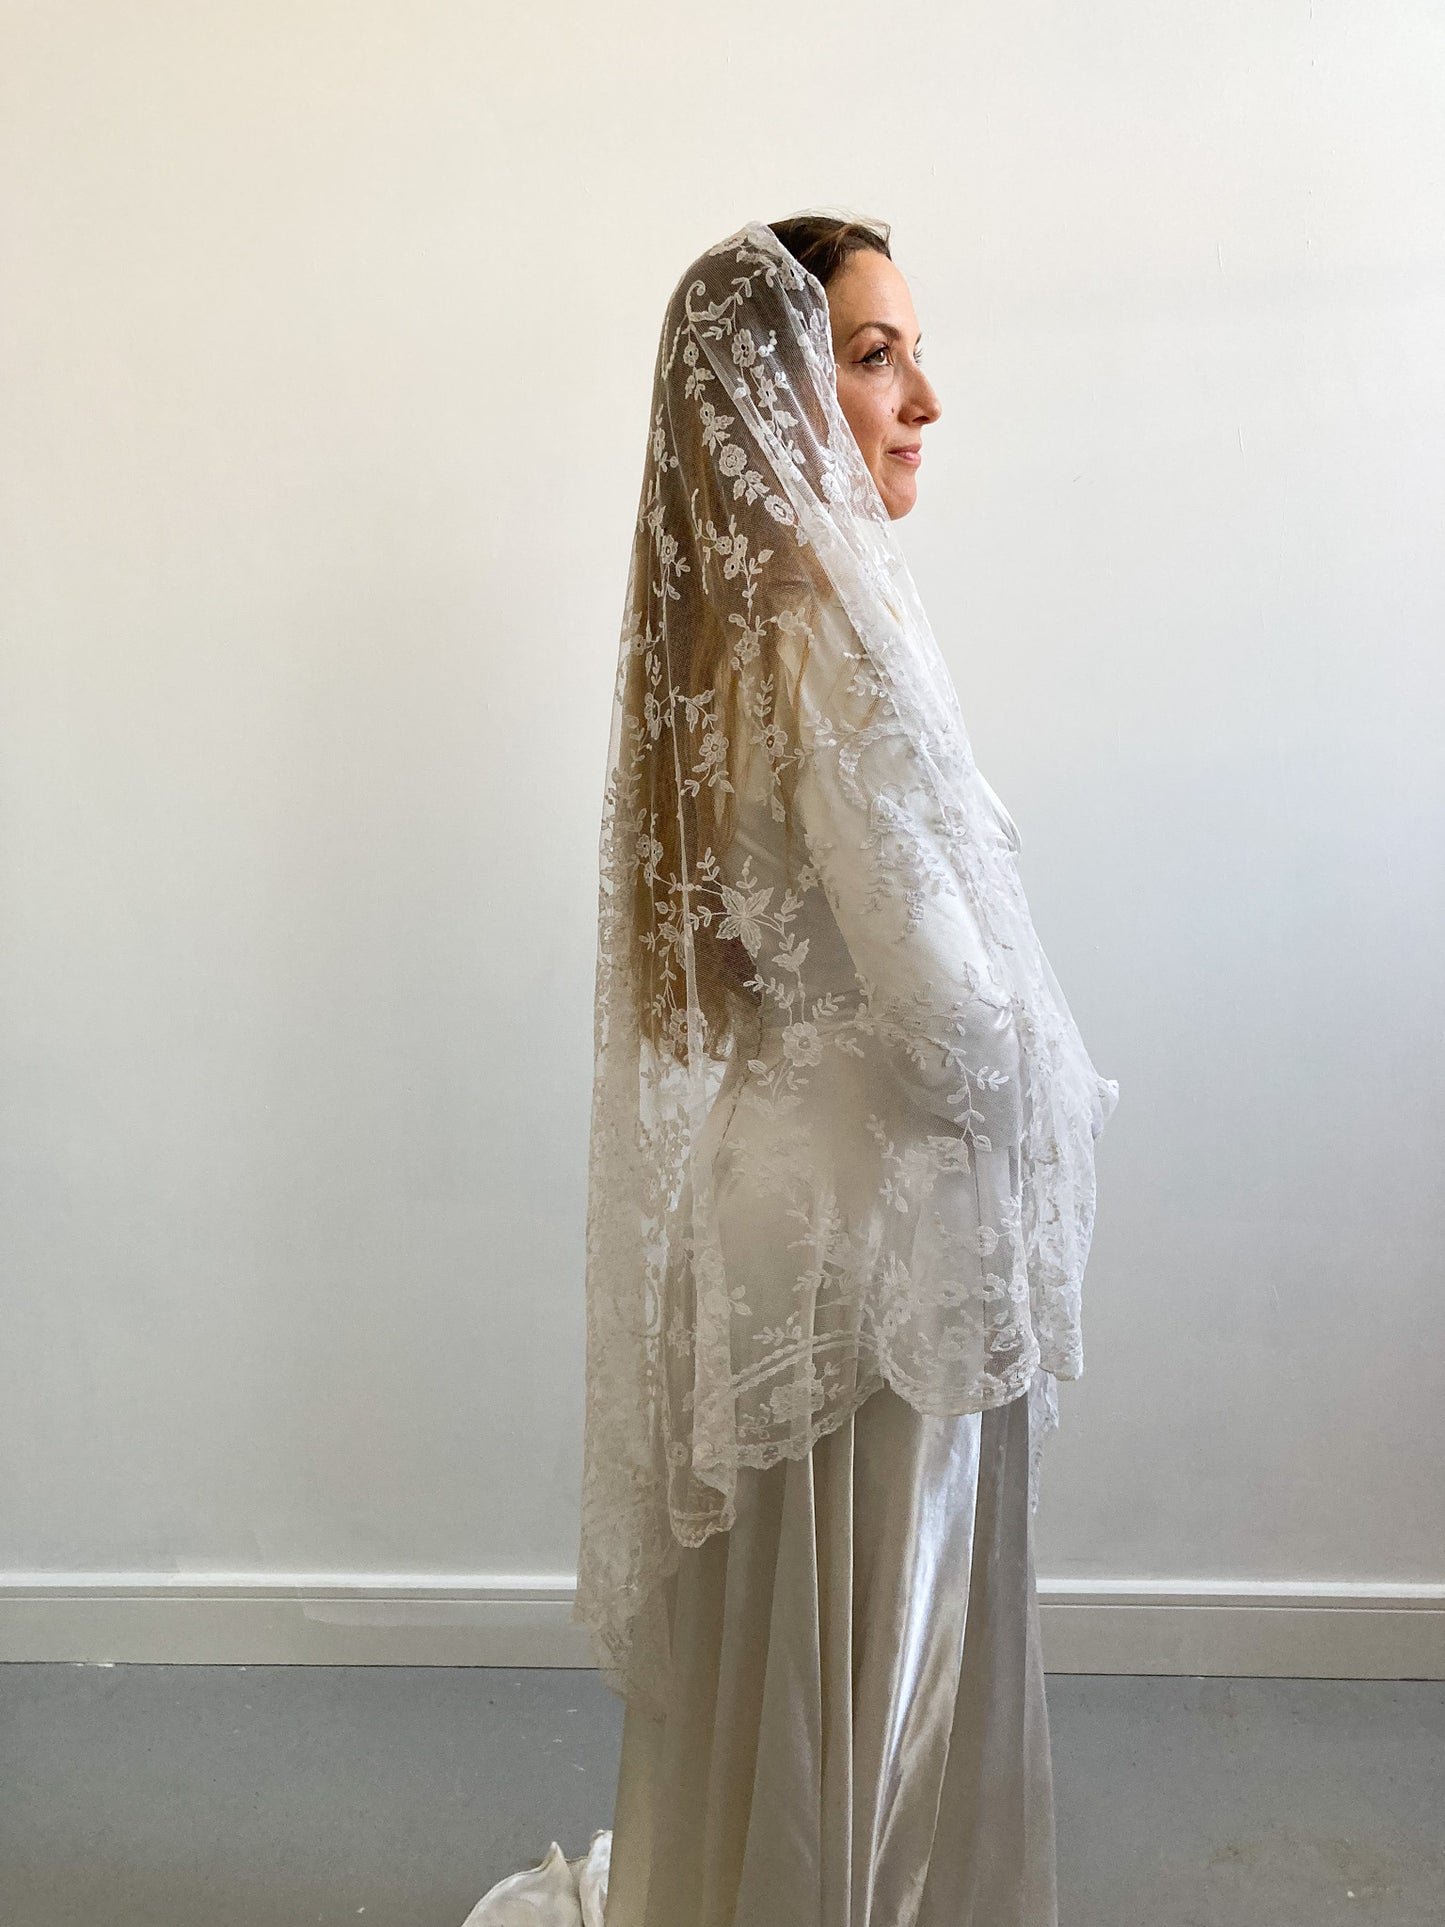 Antique Traingular Lace Veil with Flowerhead Embroidery & Scalloped Edging